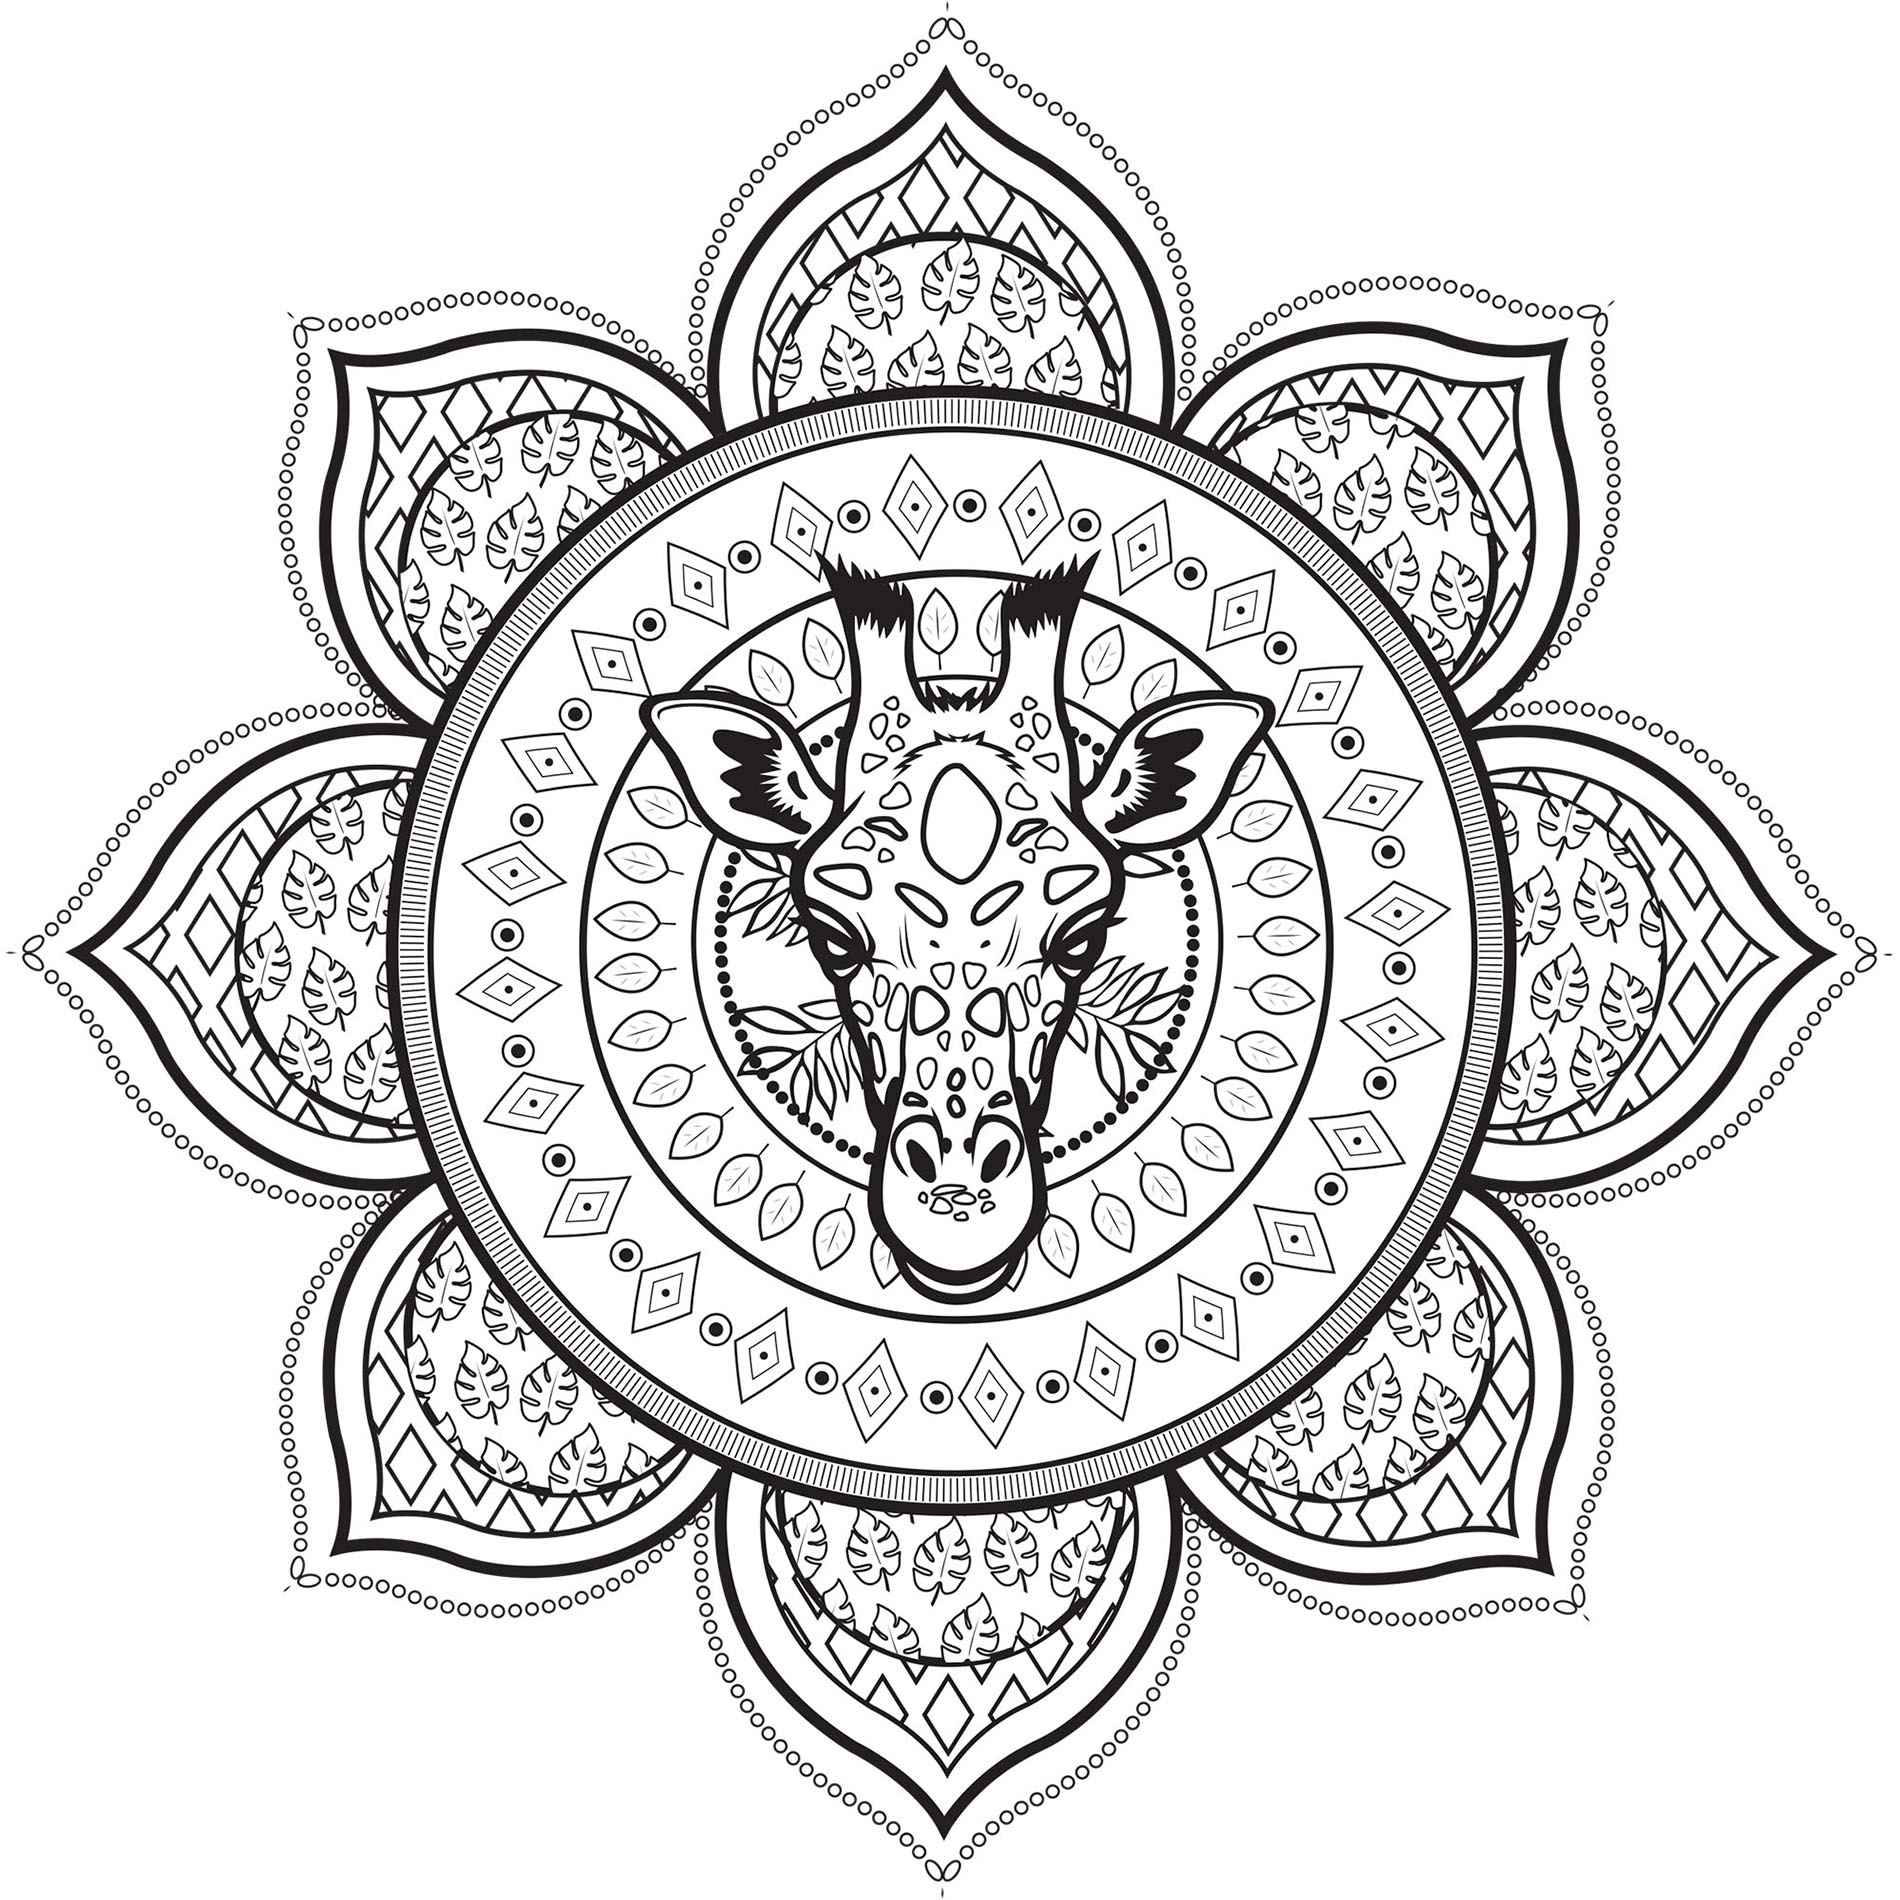 If you are ready to spend long minutes of relaxation, get ready to color this complex Mandala with a giraffe head ... You can use few or many colors, it's like you prefer. You must clear your mind and allow yourself to forget all your worries and responsibilities.